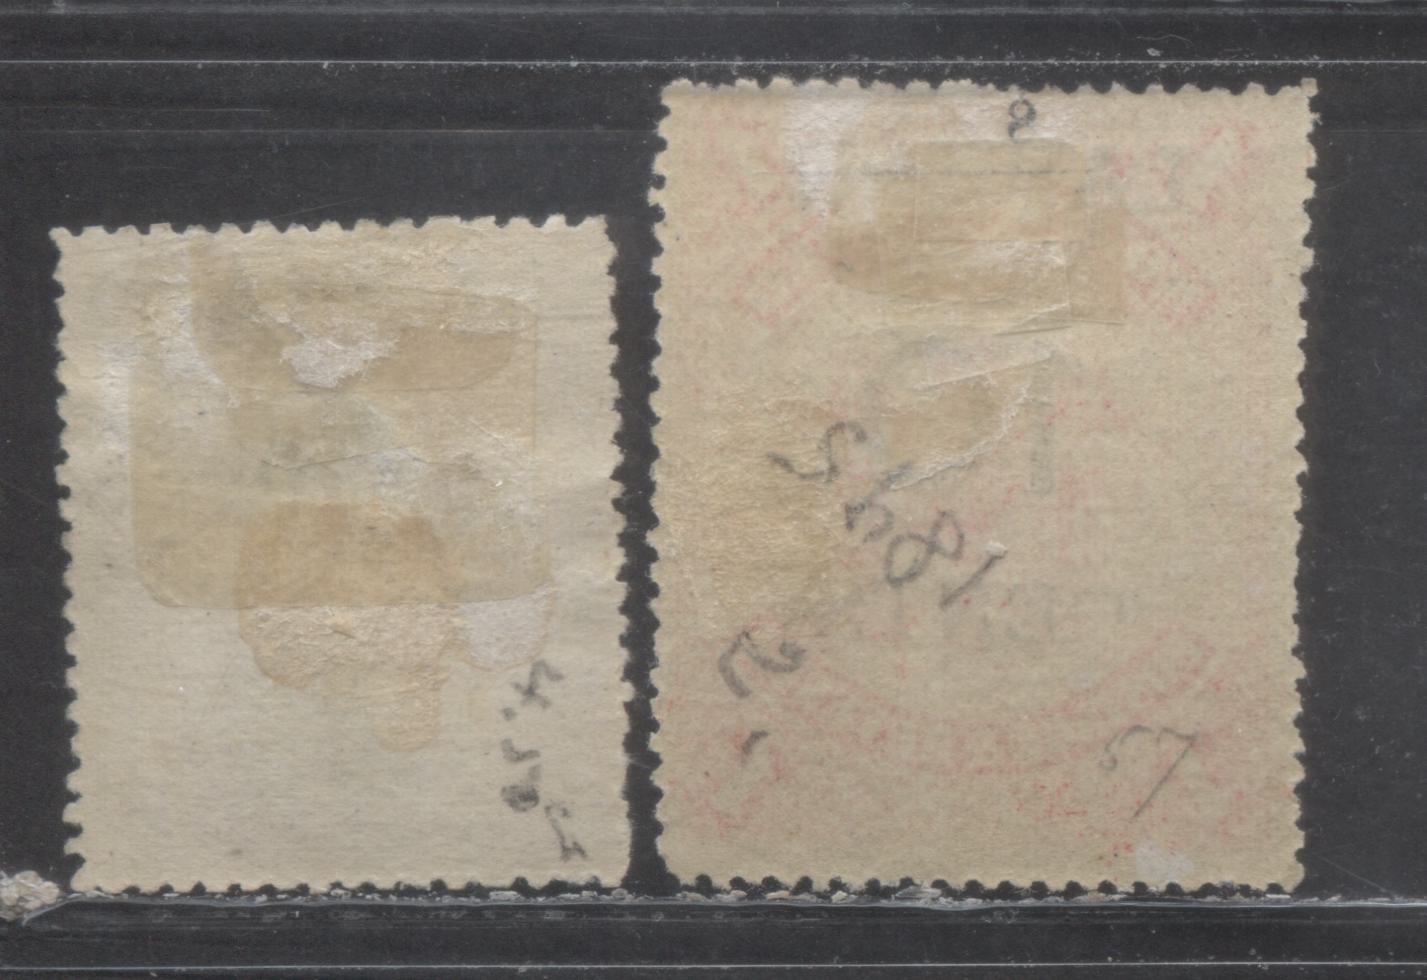 Lot 433 Labuan SC#54/66d 1895 Definitives, Perf 13.5 x 14 (1c), 2 VG/FOG Single, Click on Listing to See ALL Pictures, Estimated Value $20 USD